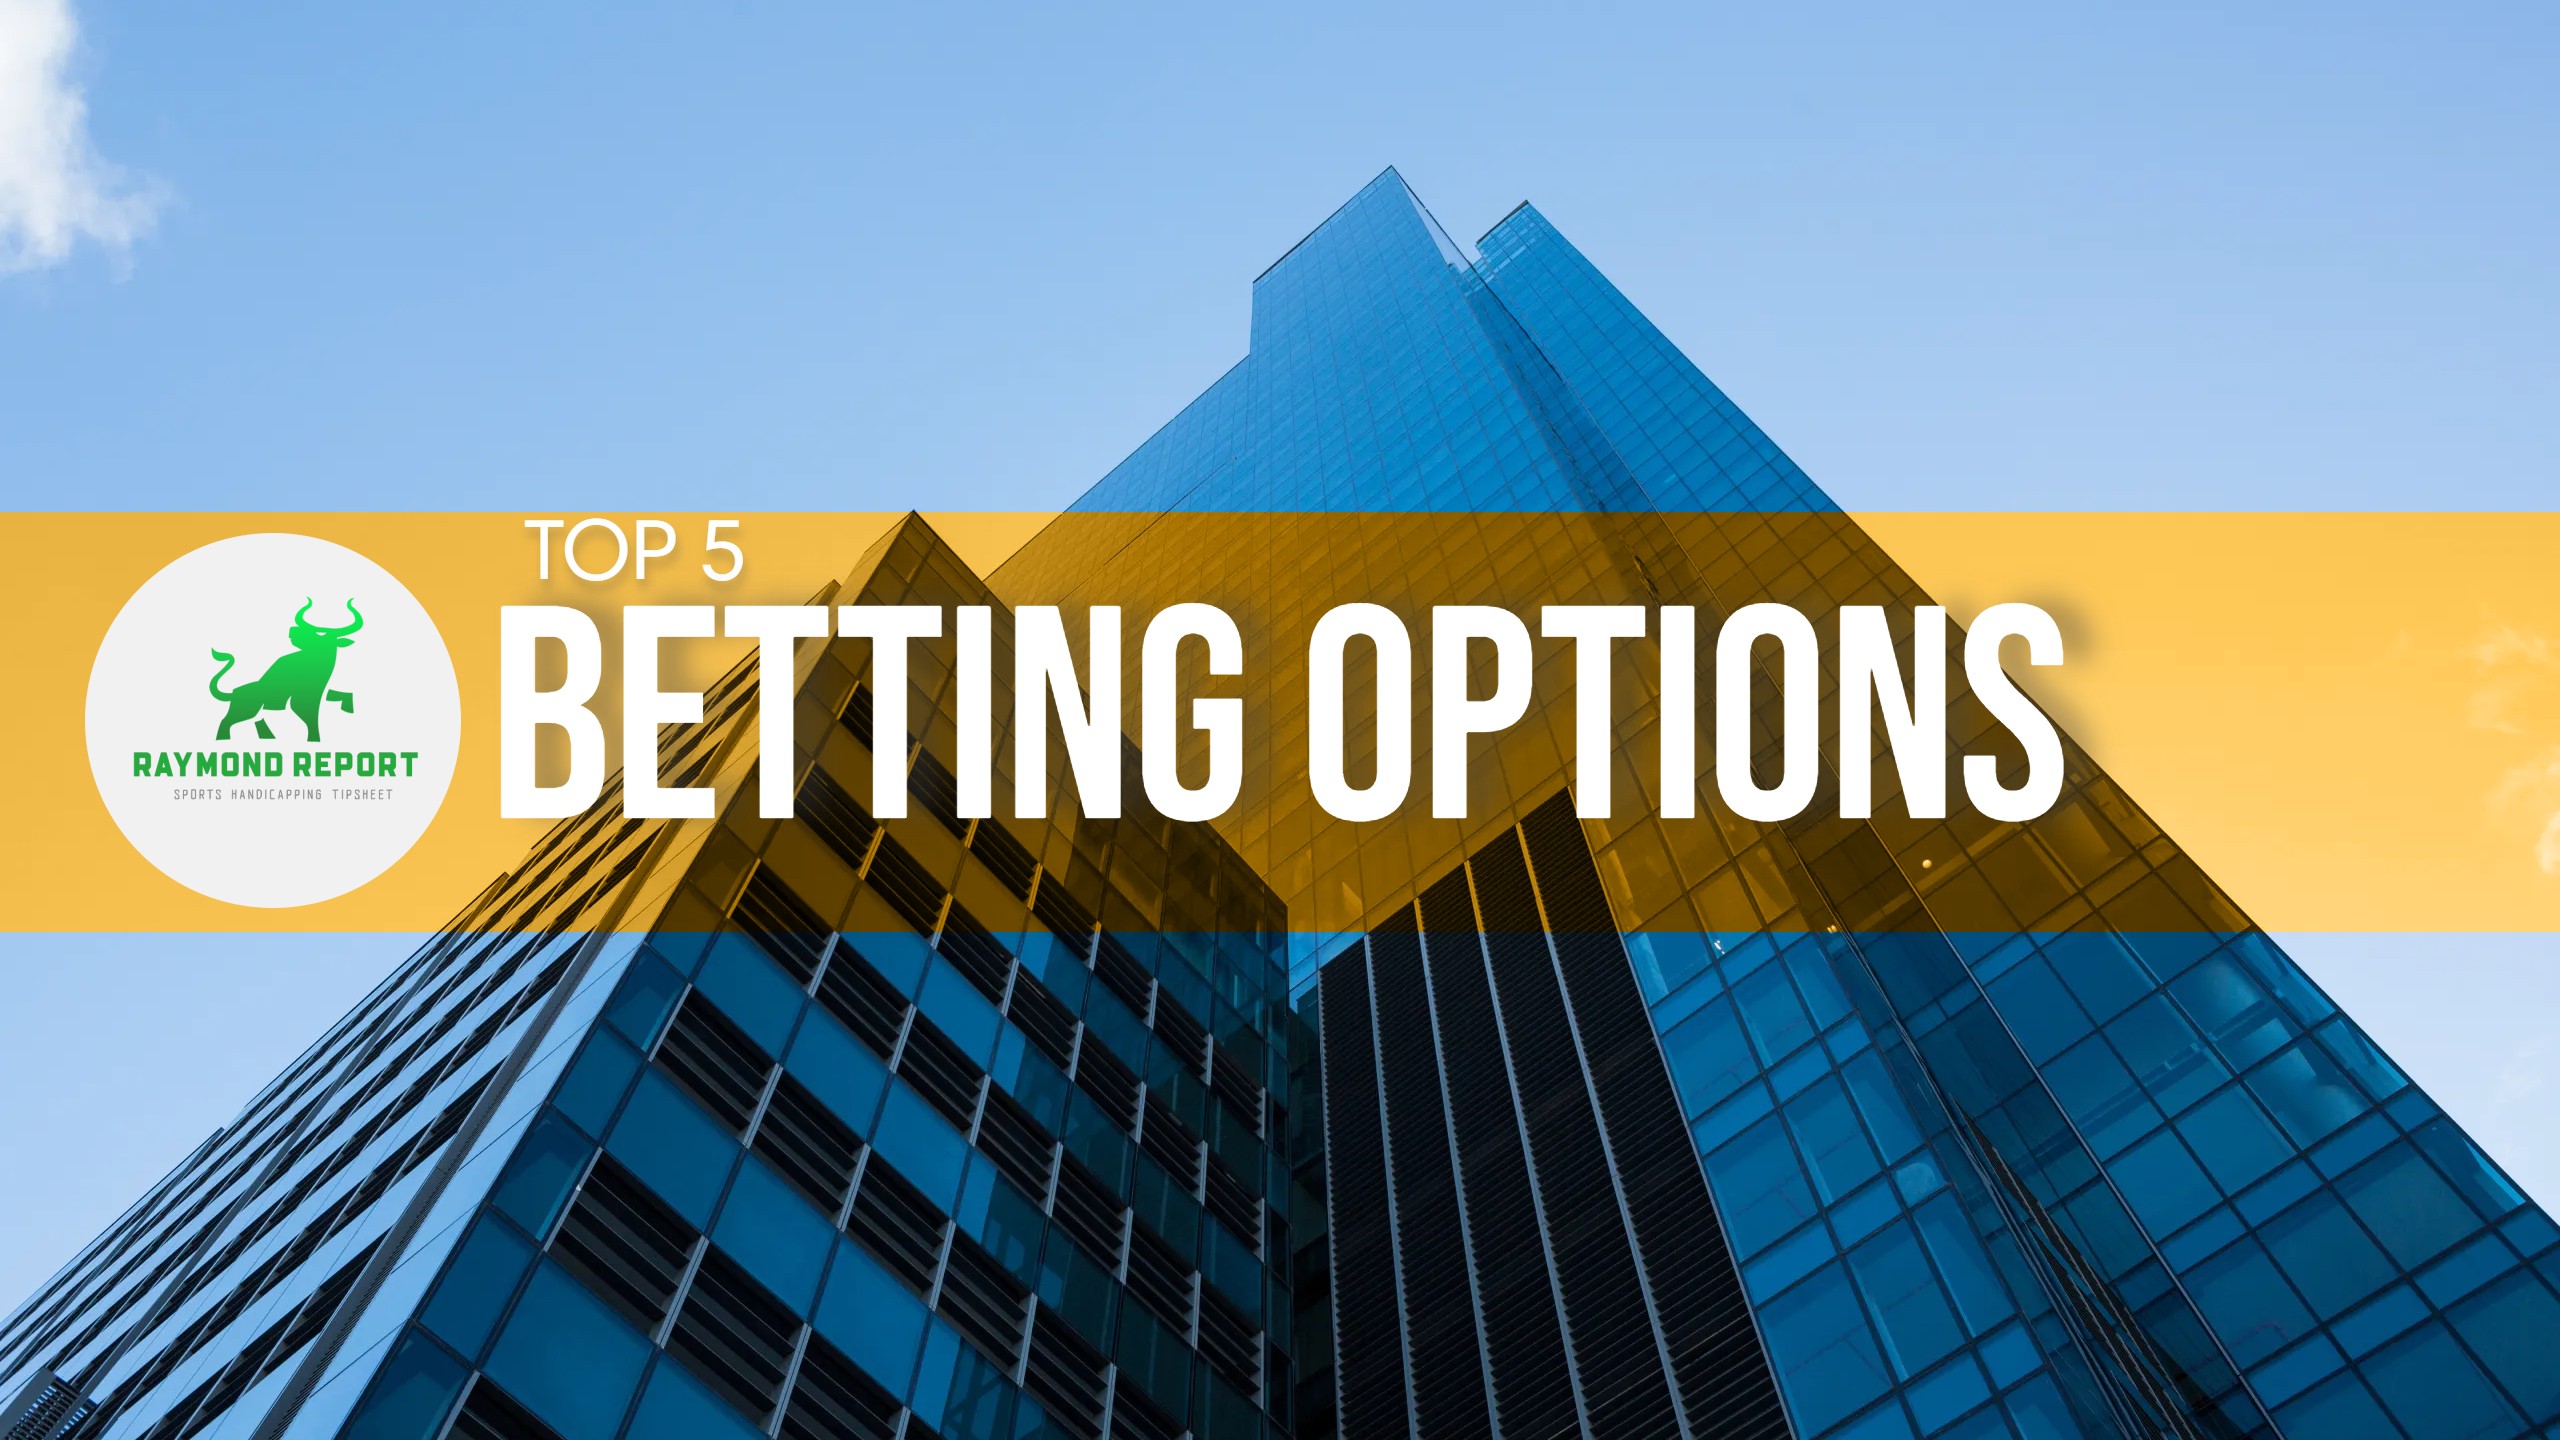 Top 5 Betting Options